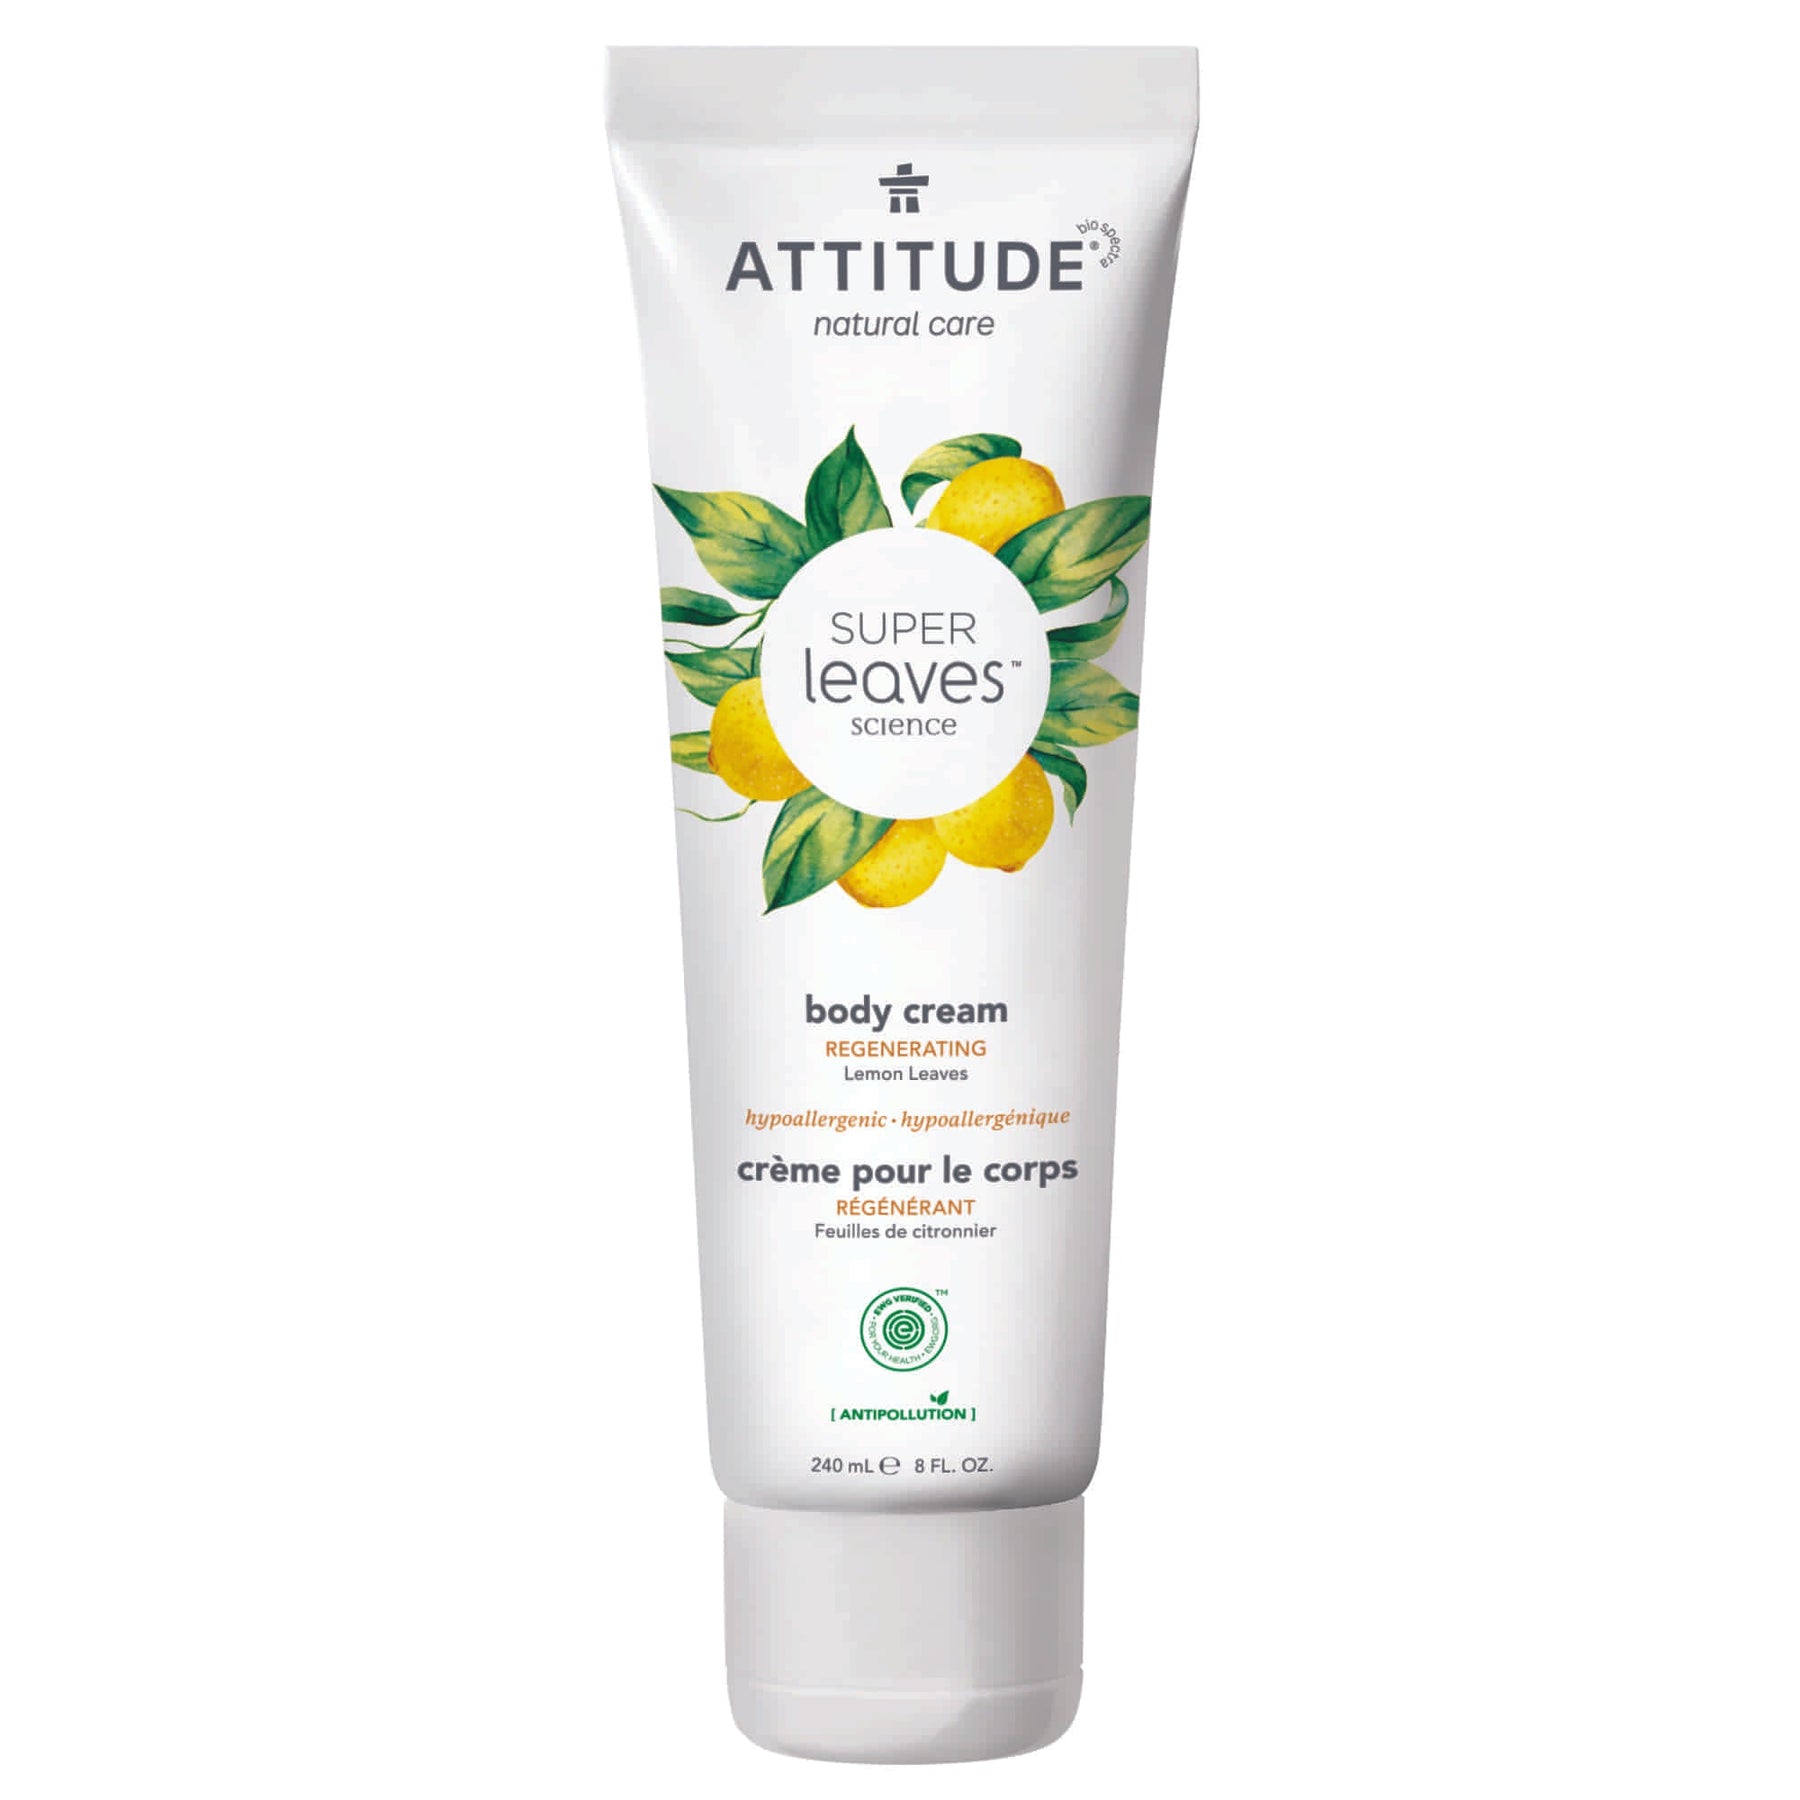 Body Cream : SUPER LEAVES™ - Lemon Leaves - by Attitude |ProCare Outlet|